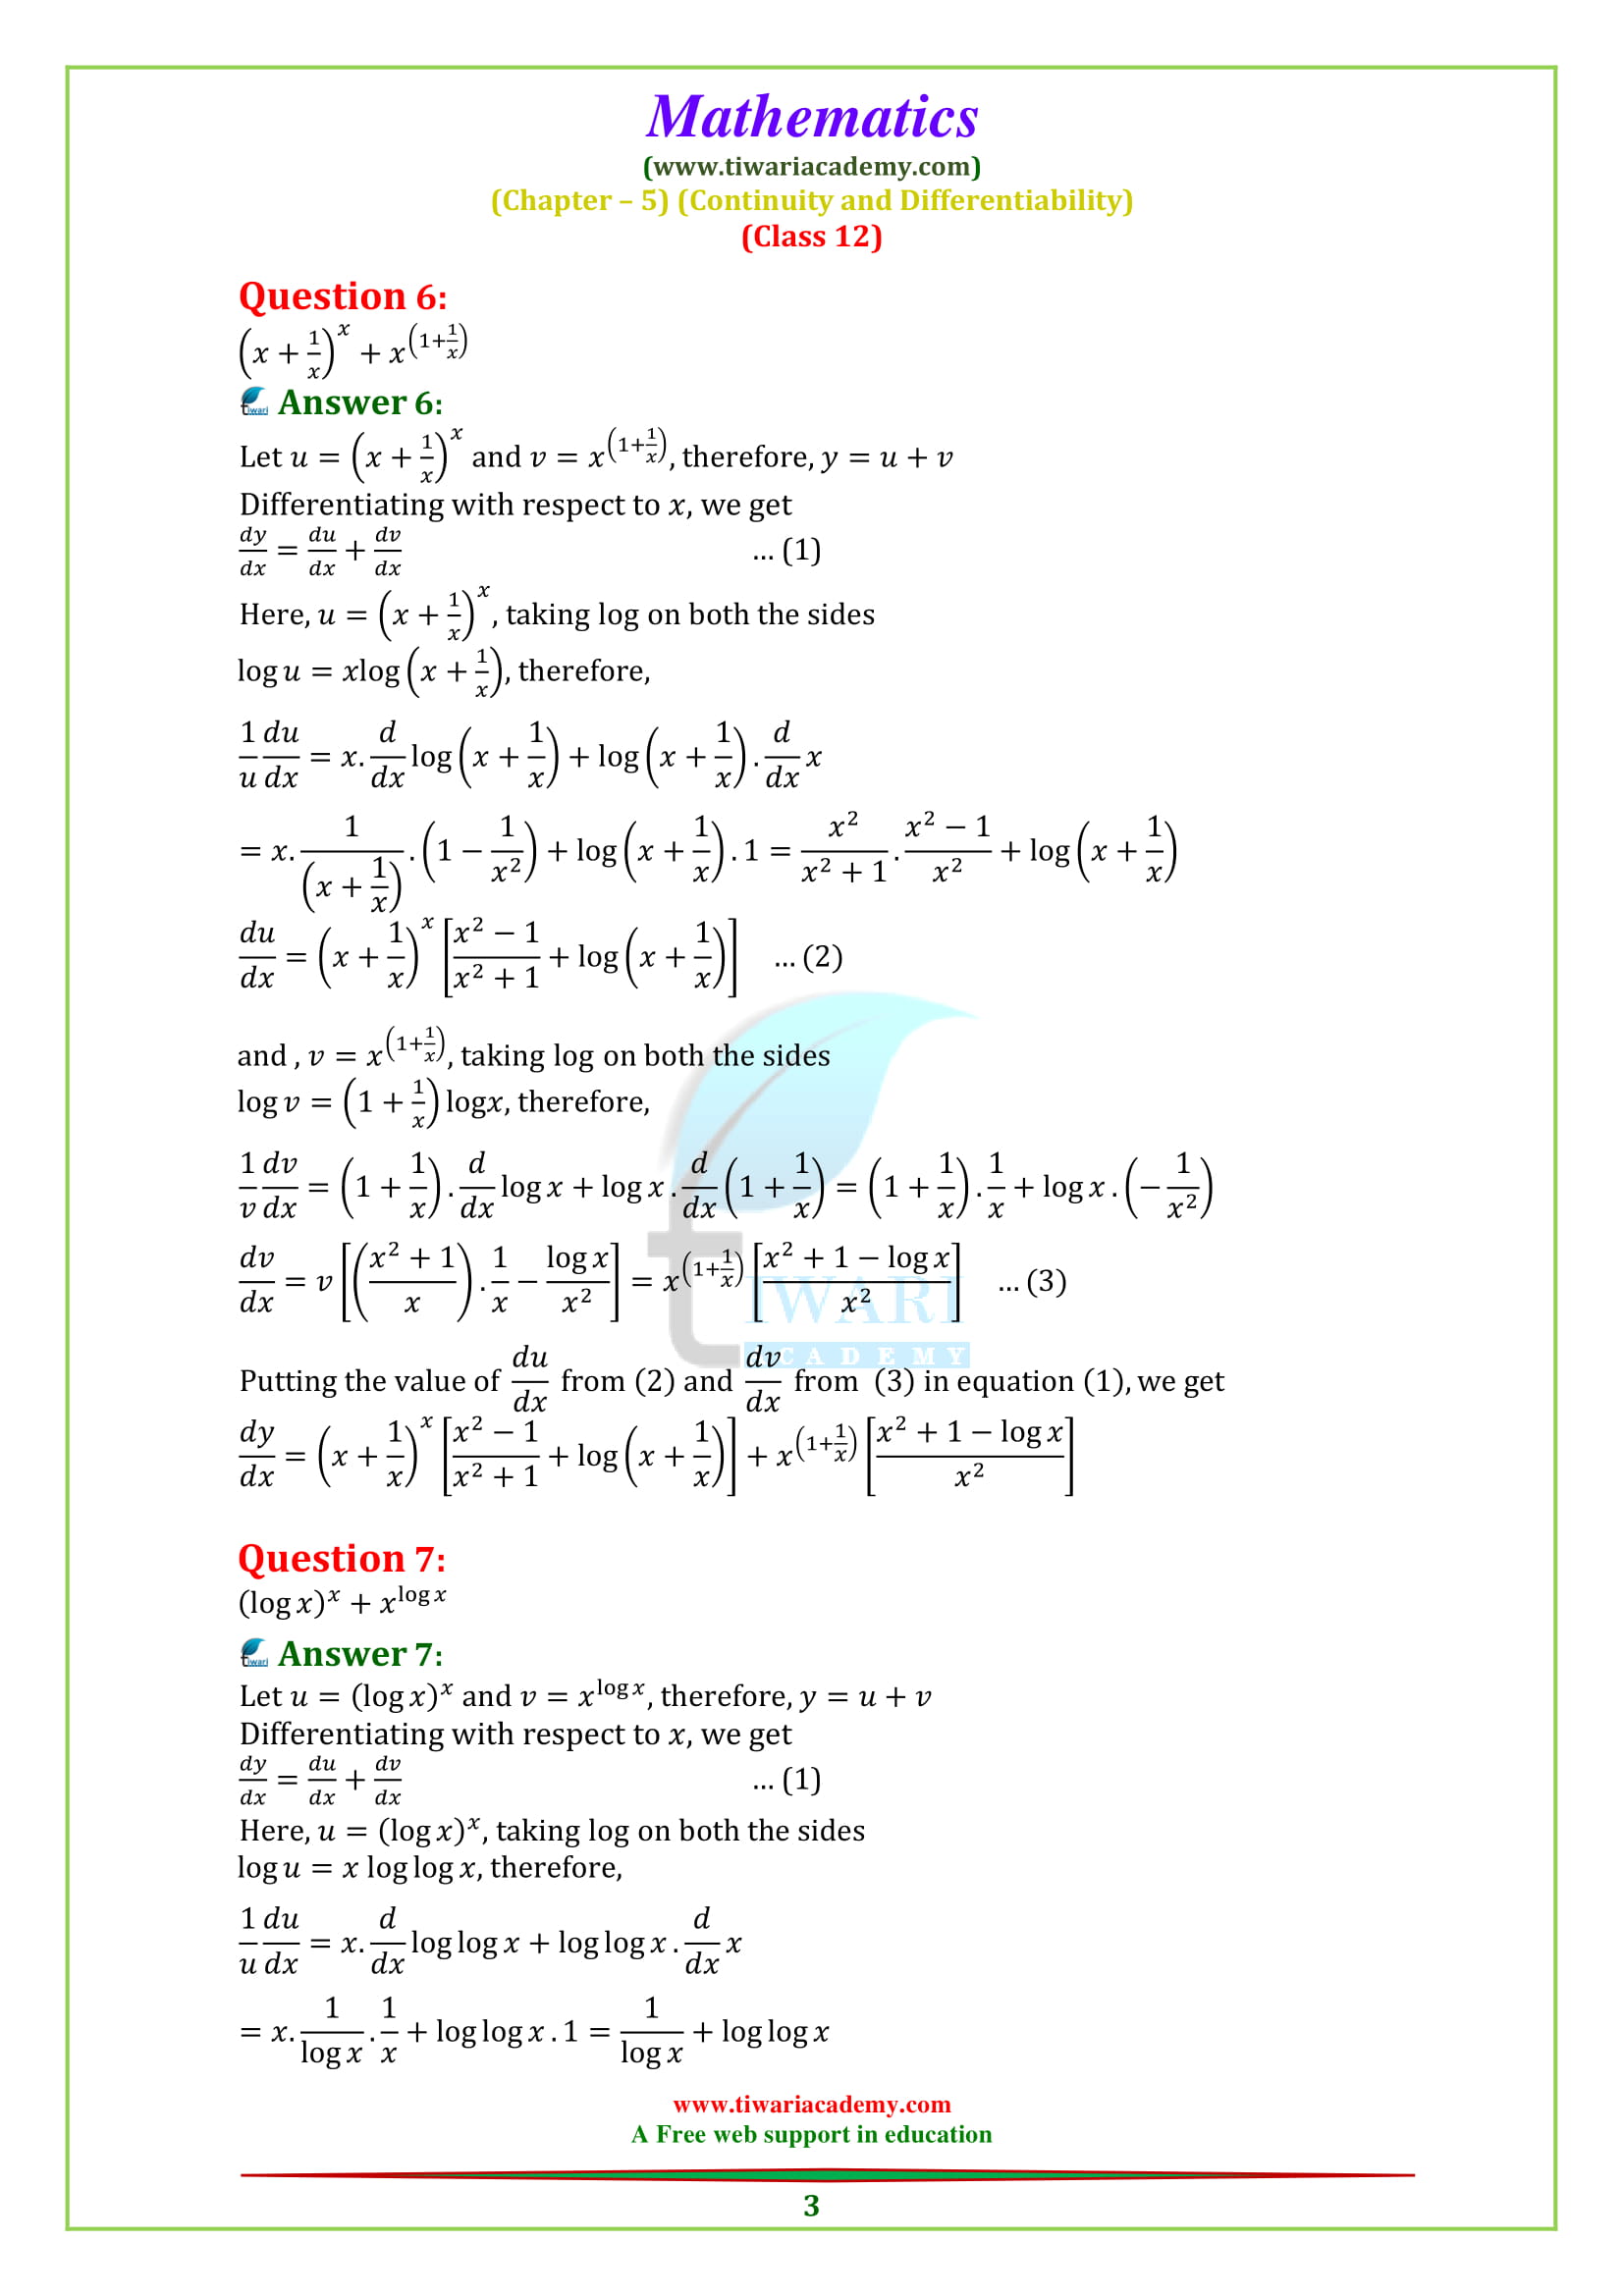 NCERT Solutions for Class 12 Maths Chapter 5 Exercise 5.5 question 1, 2, 3, 4, 5, 6